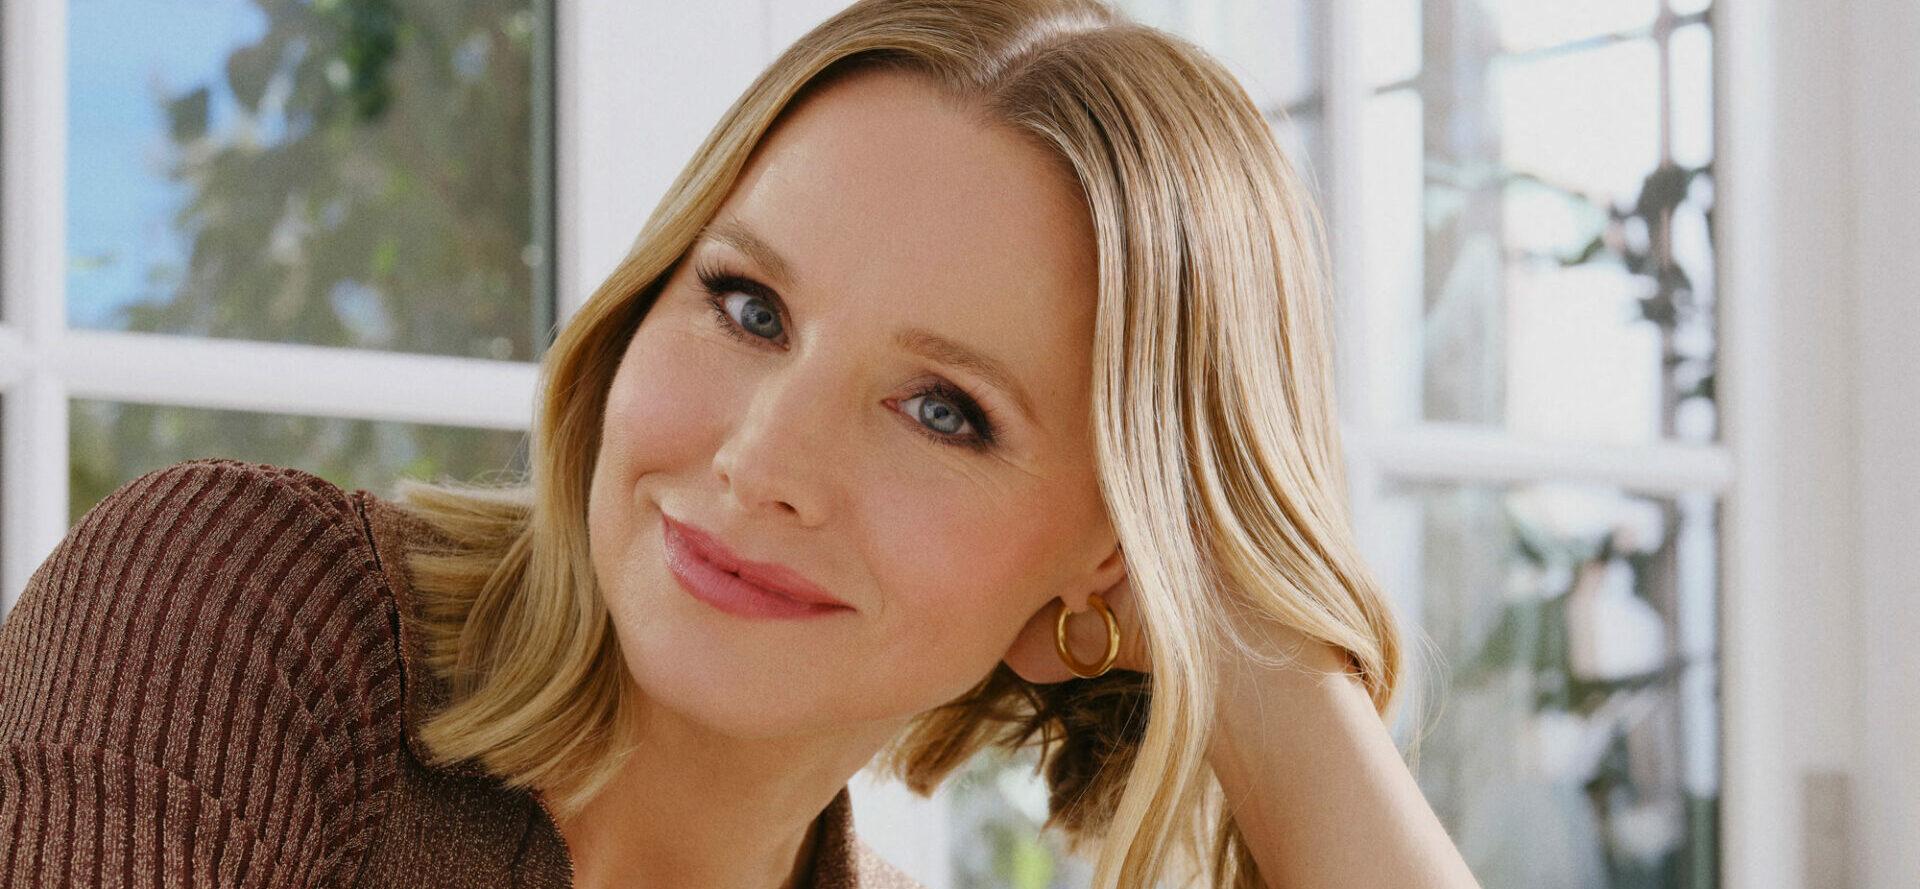 Kristen Bell Shares Mental Health Journey And Announces Partnership With Telehealth Company